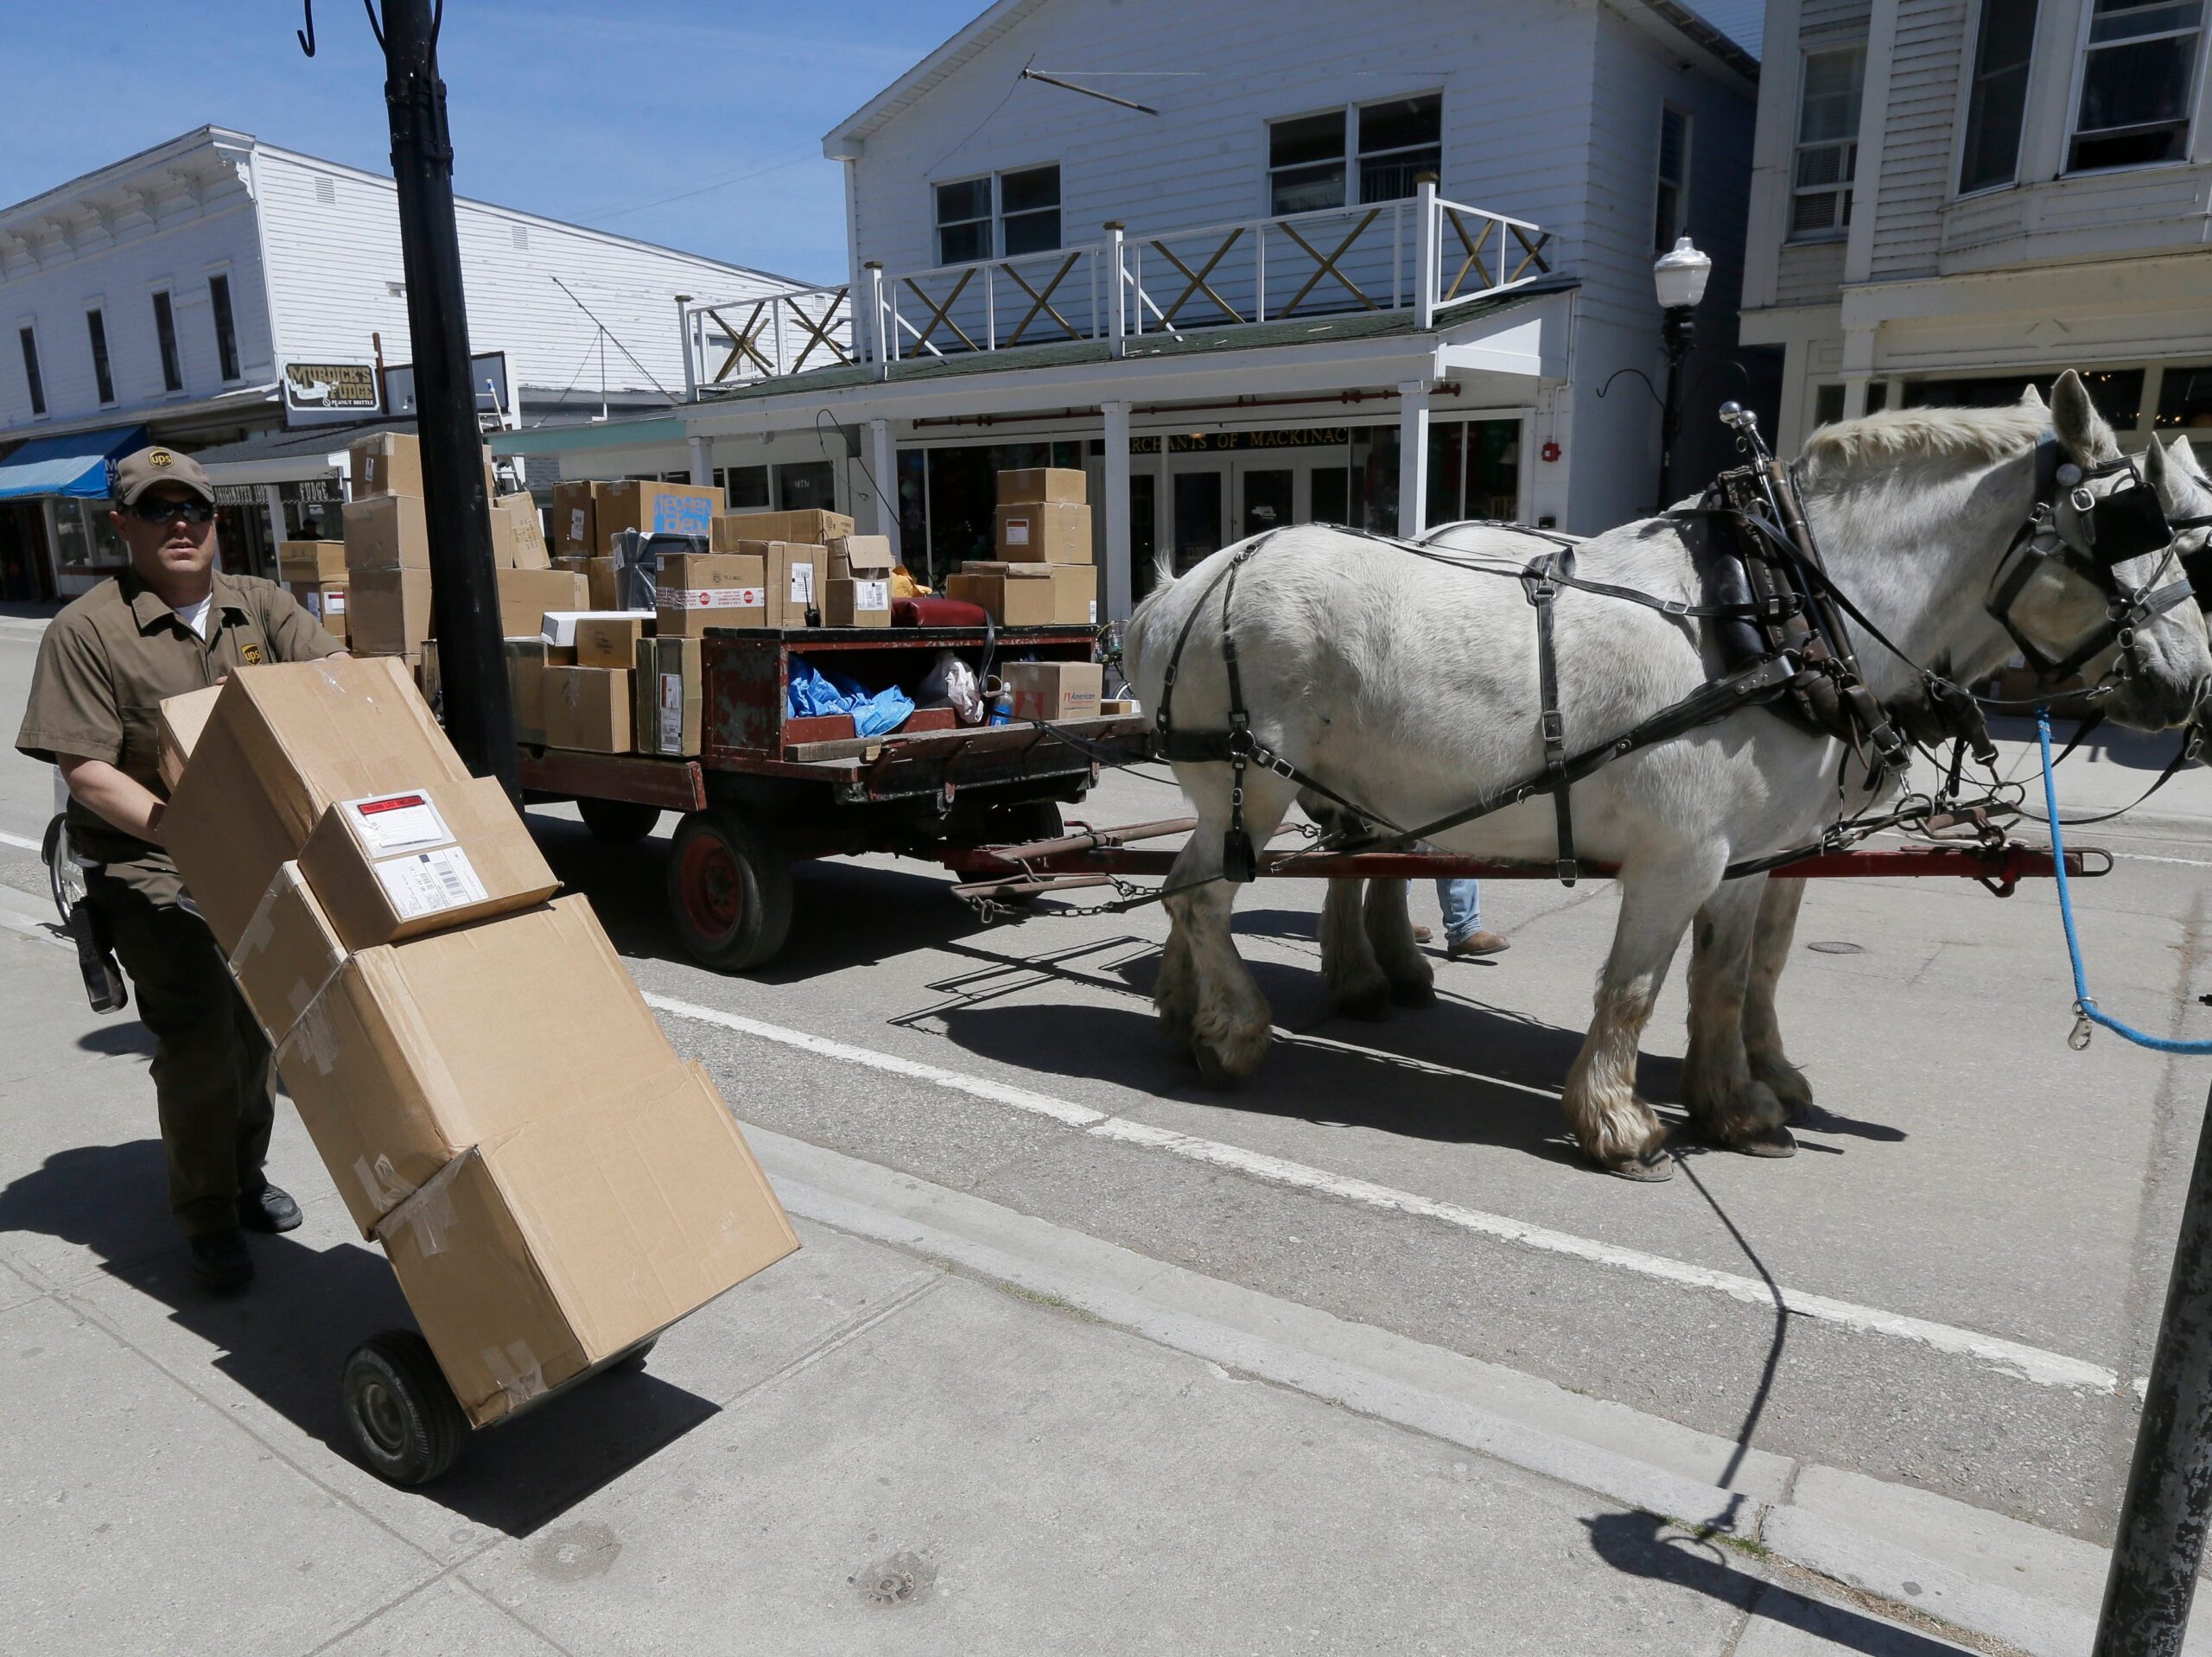 A white horse pulls a cart full of cardboard packages behind a UPS driver in a brown uniform pushing a hand truck with more packages.